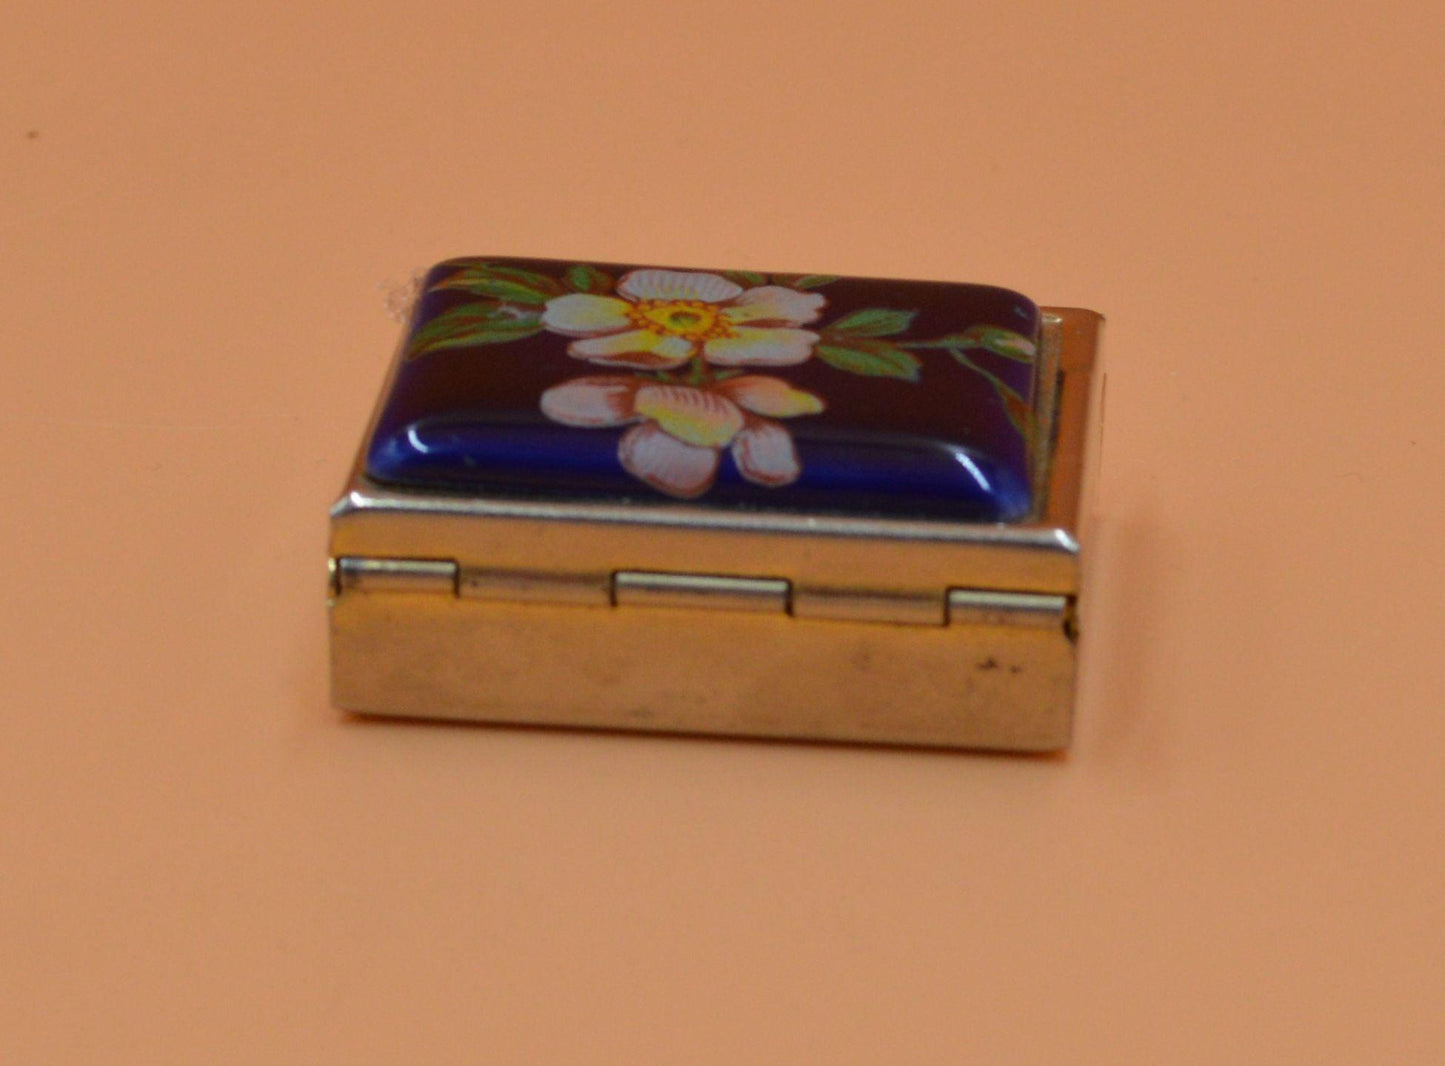 VINTAGE METAL PILL BOX WITH BLUE LID - TMD167207